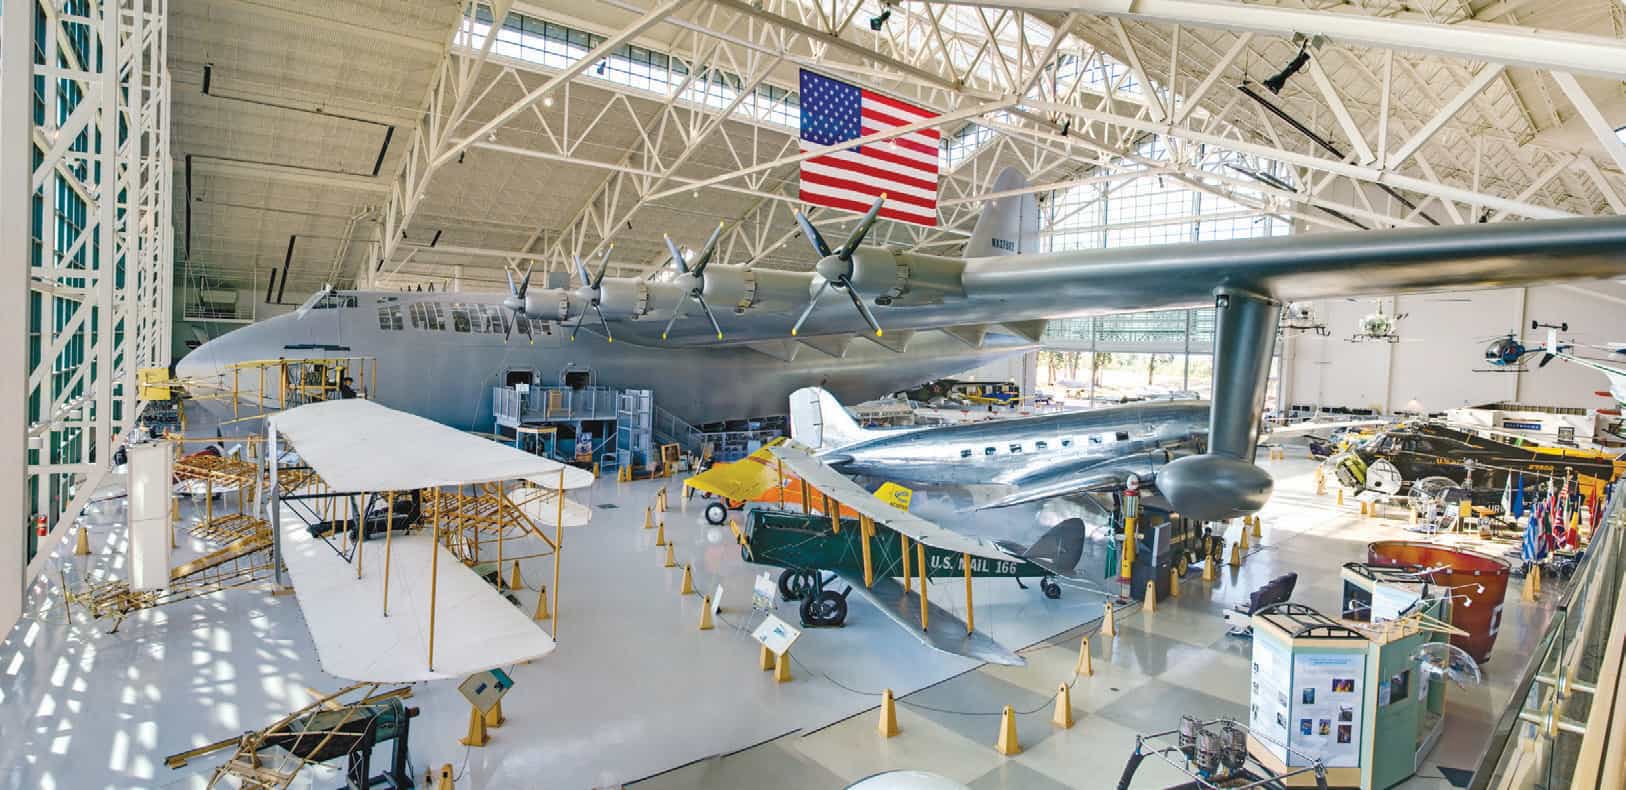 Evergreen Aviation & Space Museum is home to the famed Spruce Goose, Howard Hughes’ flying folly.